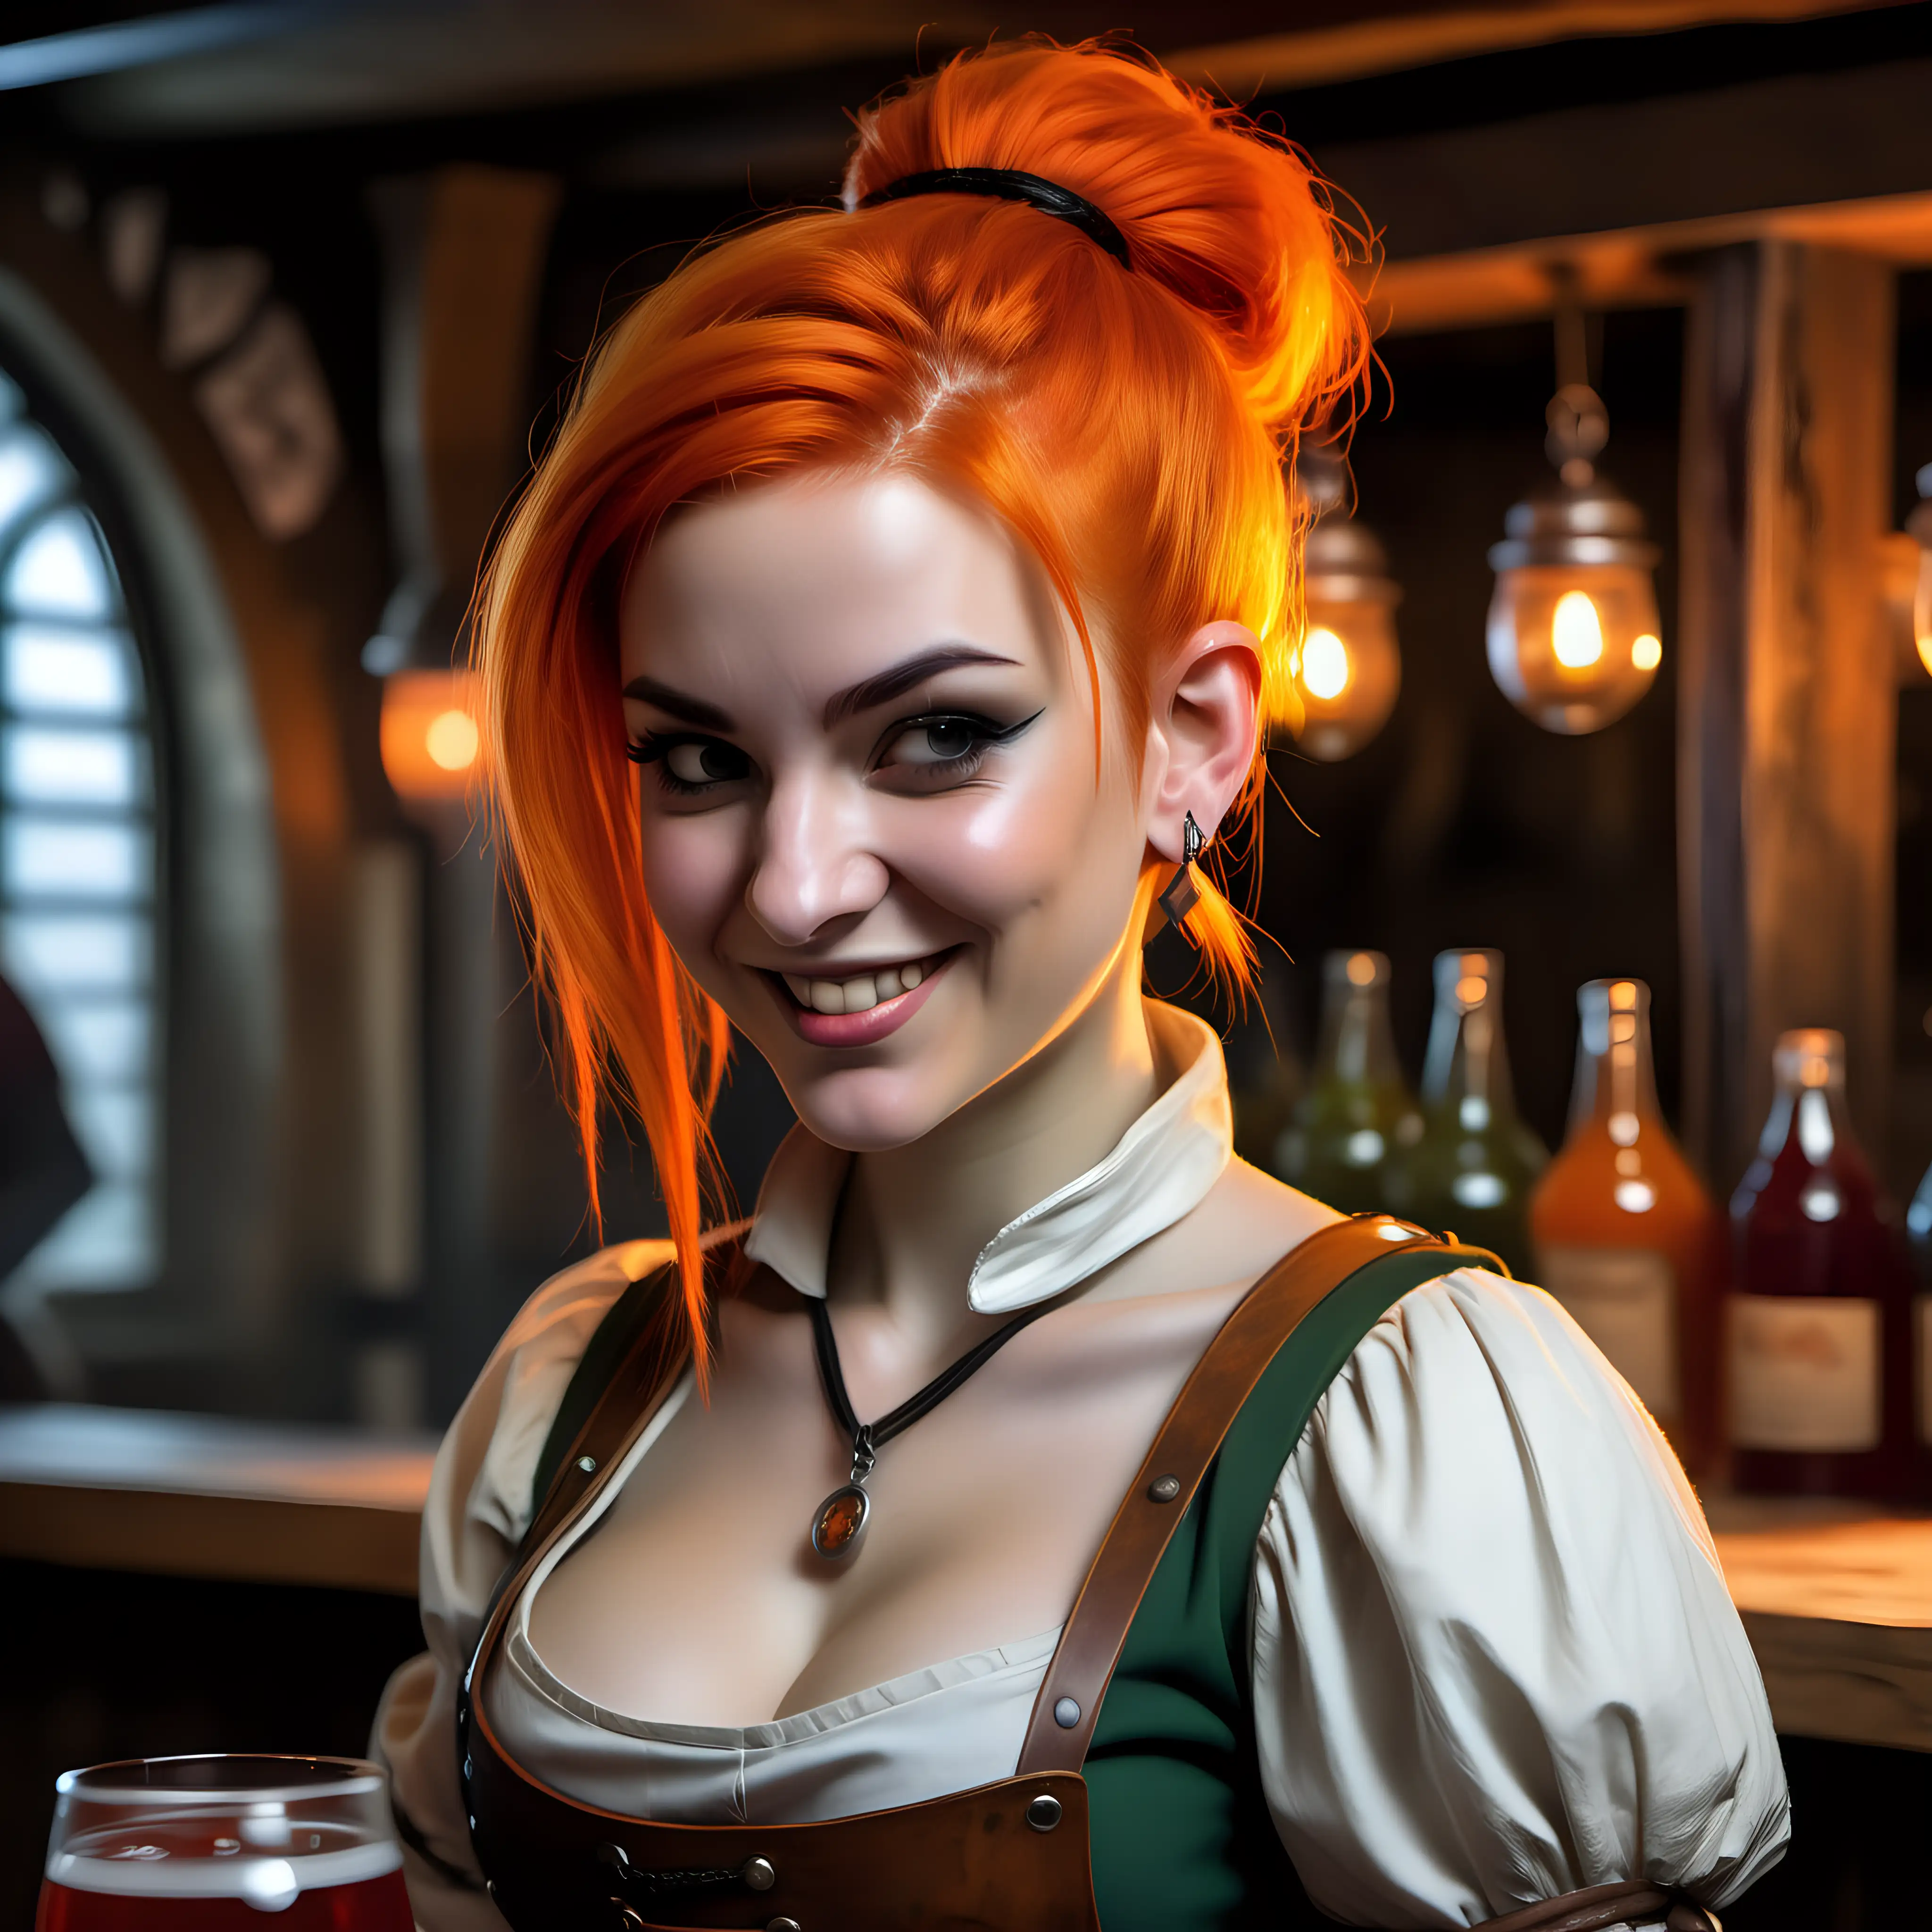 female rogue, amused expression, cute, strong, amulet necklace, small stud earrings, bright orange hair in a tight bun, bartending, medieval fantasy, small tavern, super-detailed, hyper-realistic